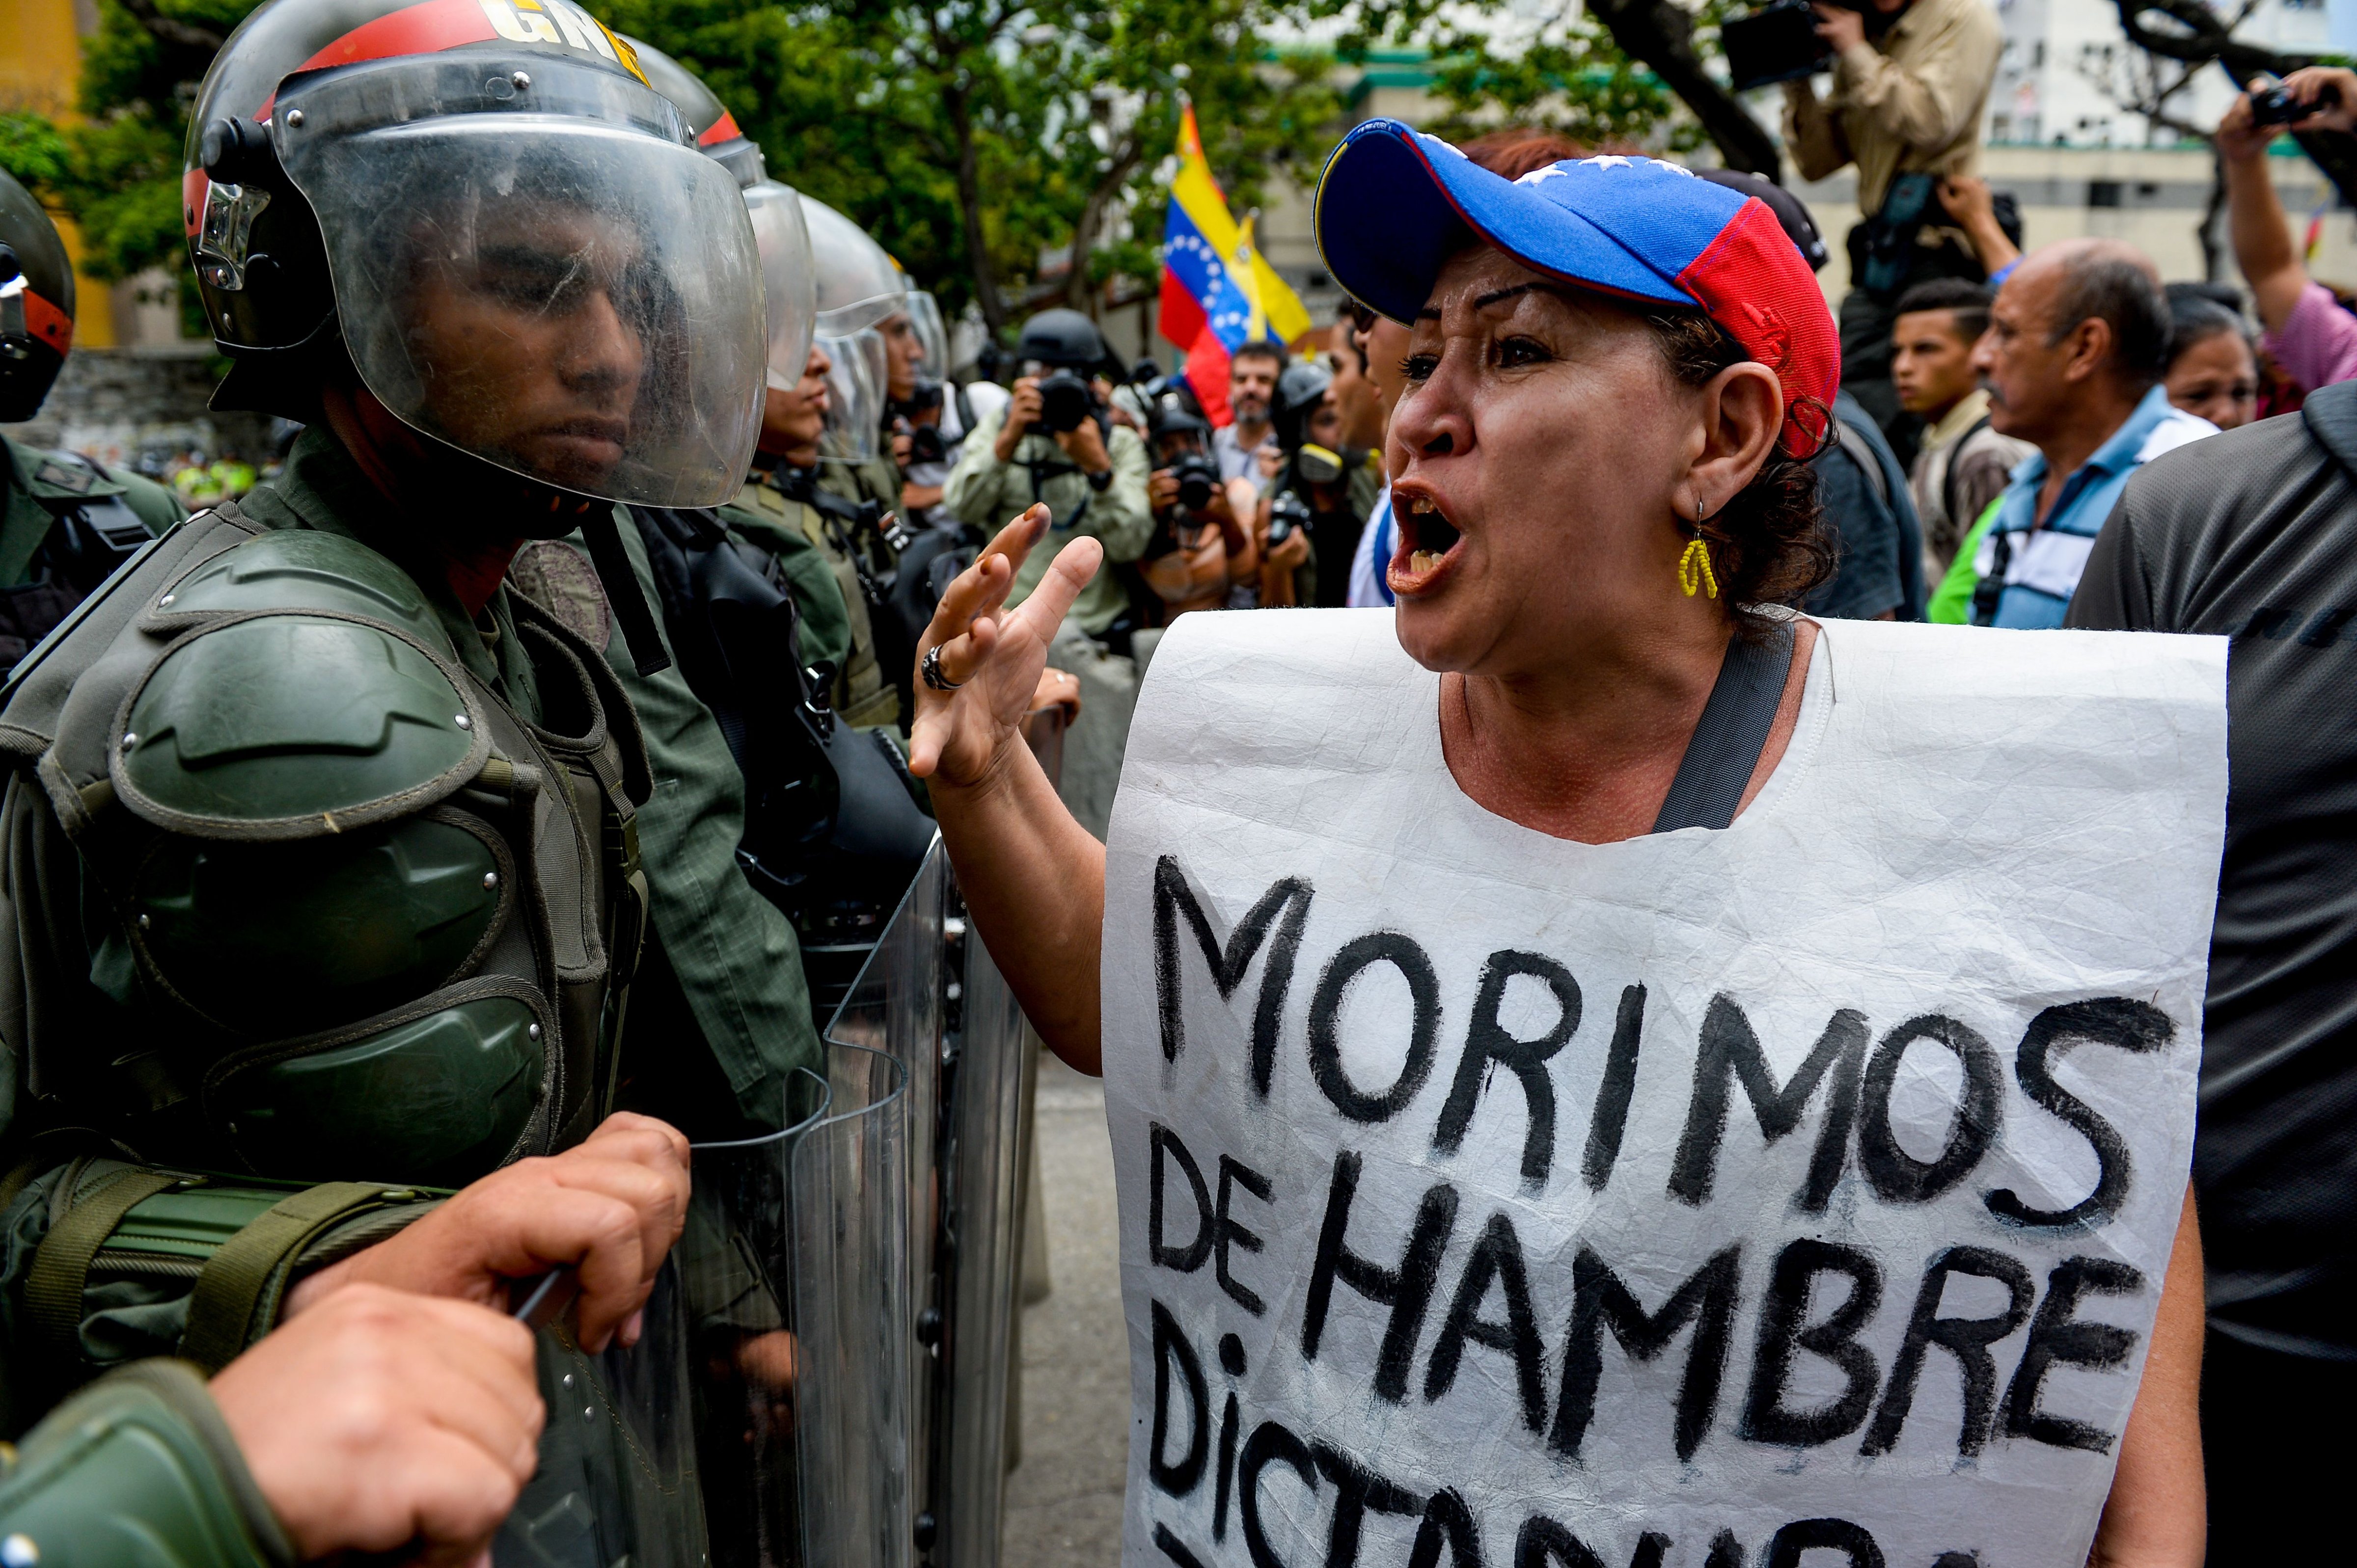 A woman with a sign reading "We starve" protests against new emergency powers decreed by President Nicolas Maduro in front of a line of riot policemen in Caracas on May 18, 2016. (FEDERICO PARRA—AFP/Getty Images)